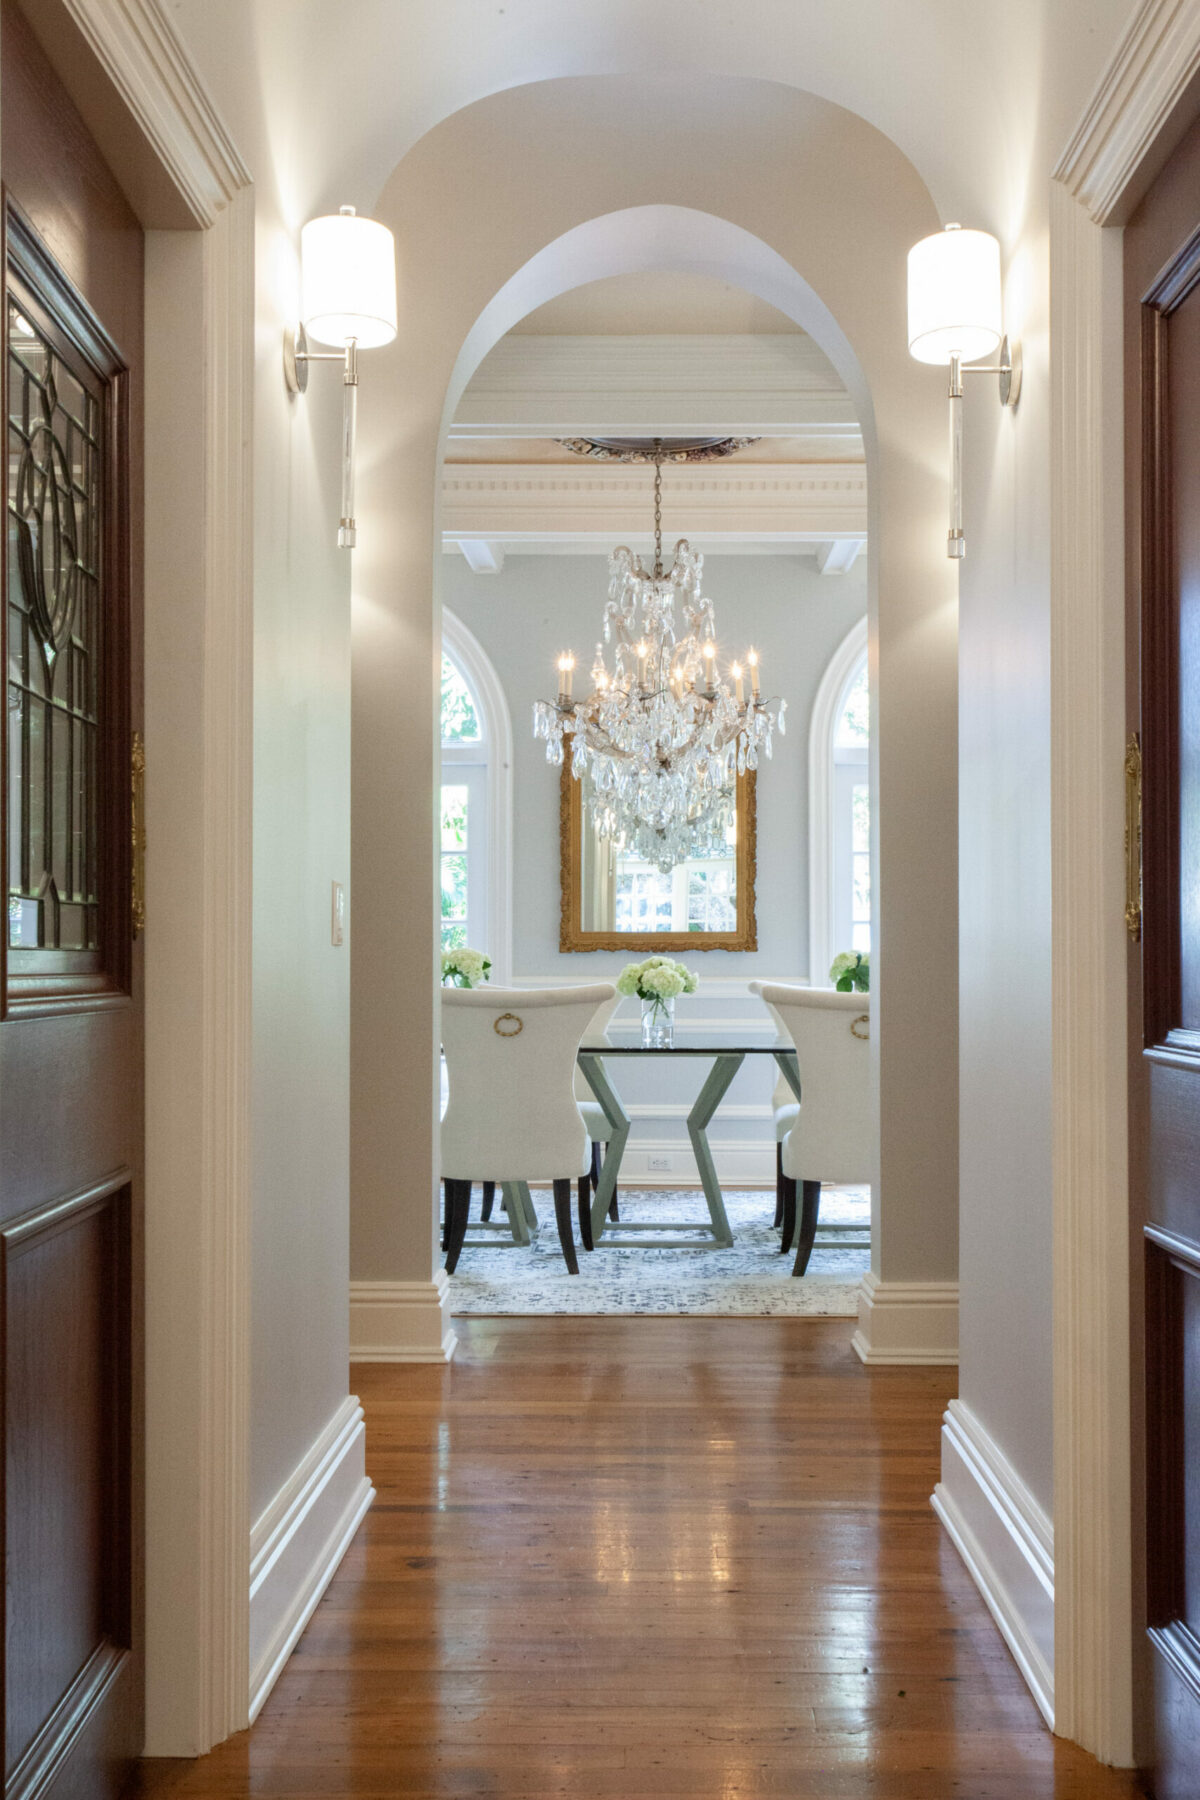 Stunning Tampa home with sophisticated furnishings, antique furniture, and thoughtful decor by Home Frosting